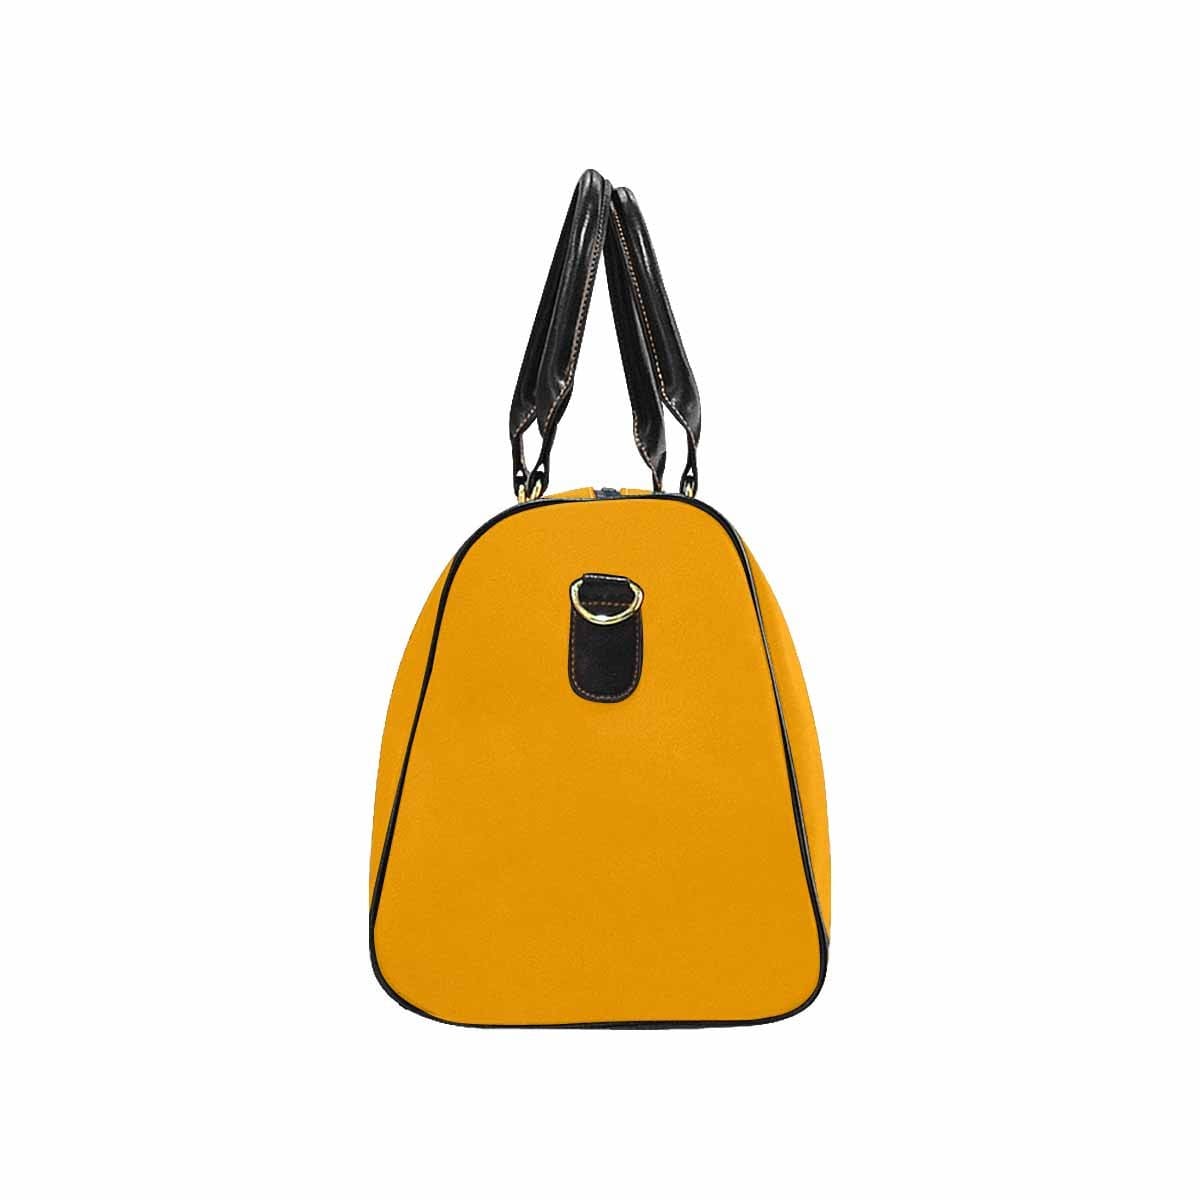 Travel Bag Leather Carry On Large Luggage Bag Bright Orange - Bags | Travel Bags